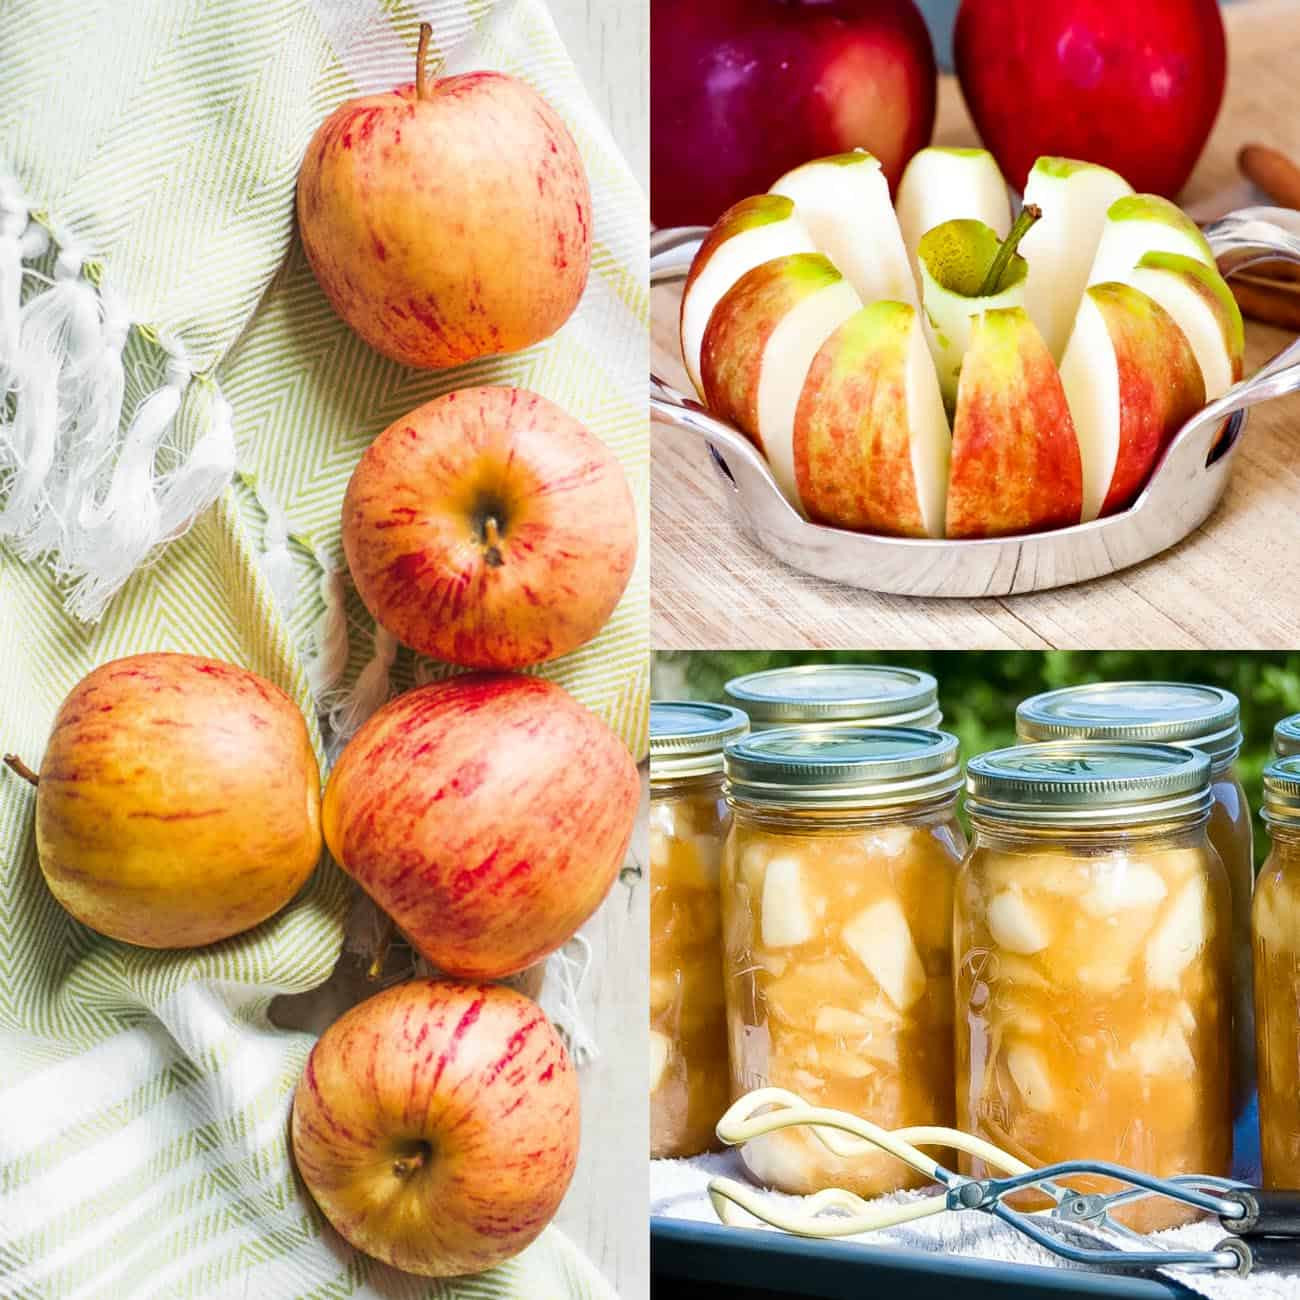 Apple Pie Filling Canning
 Canning Easy Apple Pie Filling Recipe for Pies Crisps and